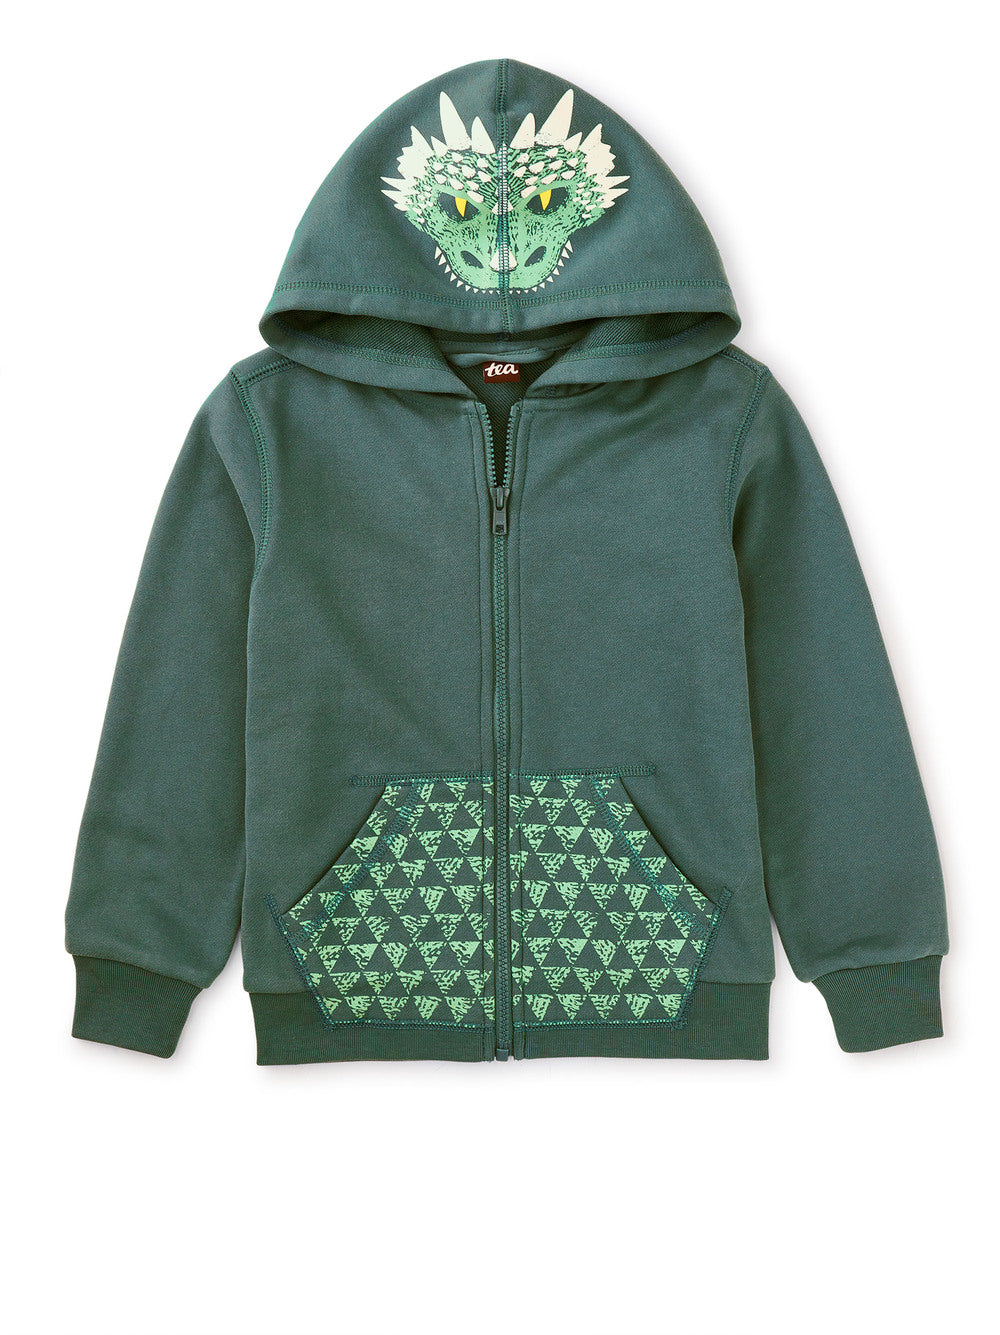 NWT Tea Collection Dragon Graphic Hoodie